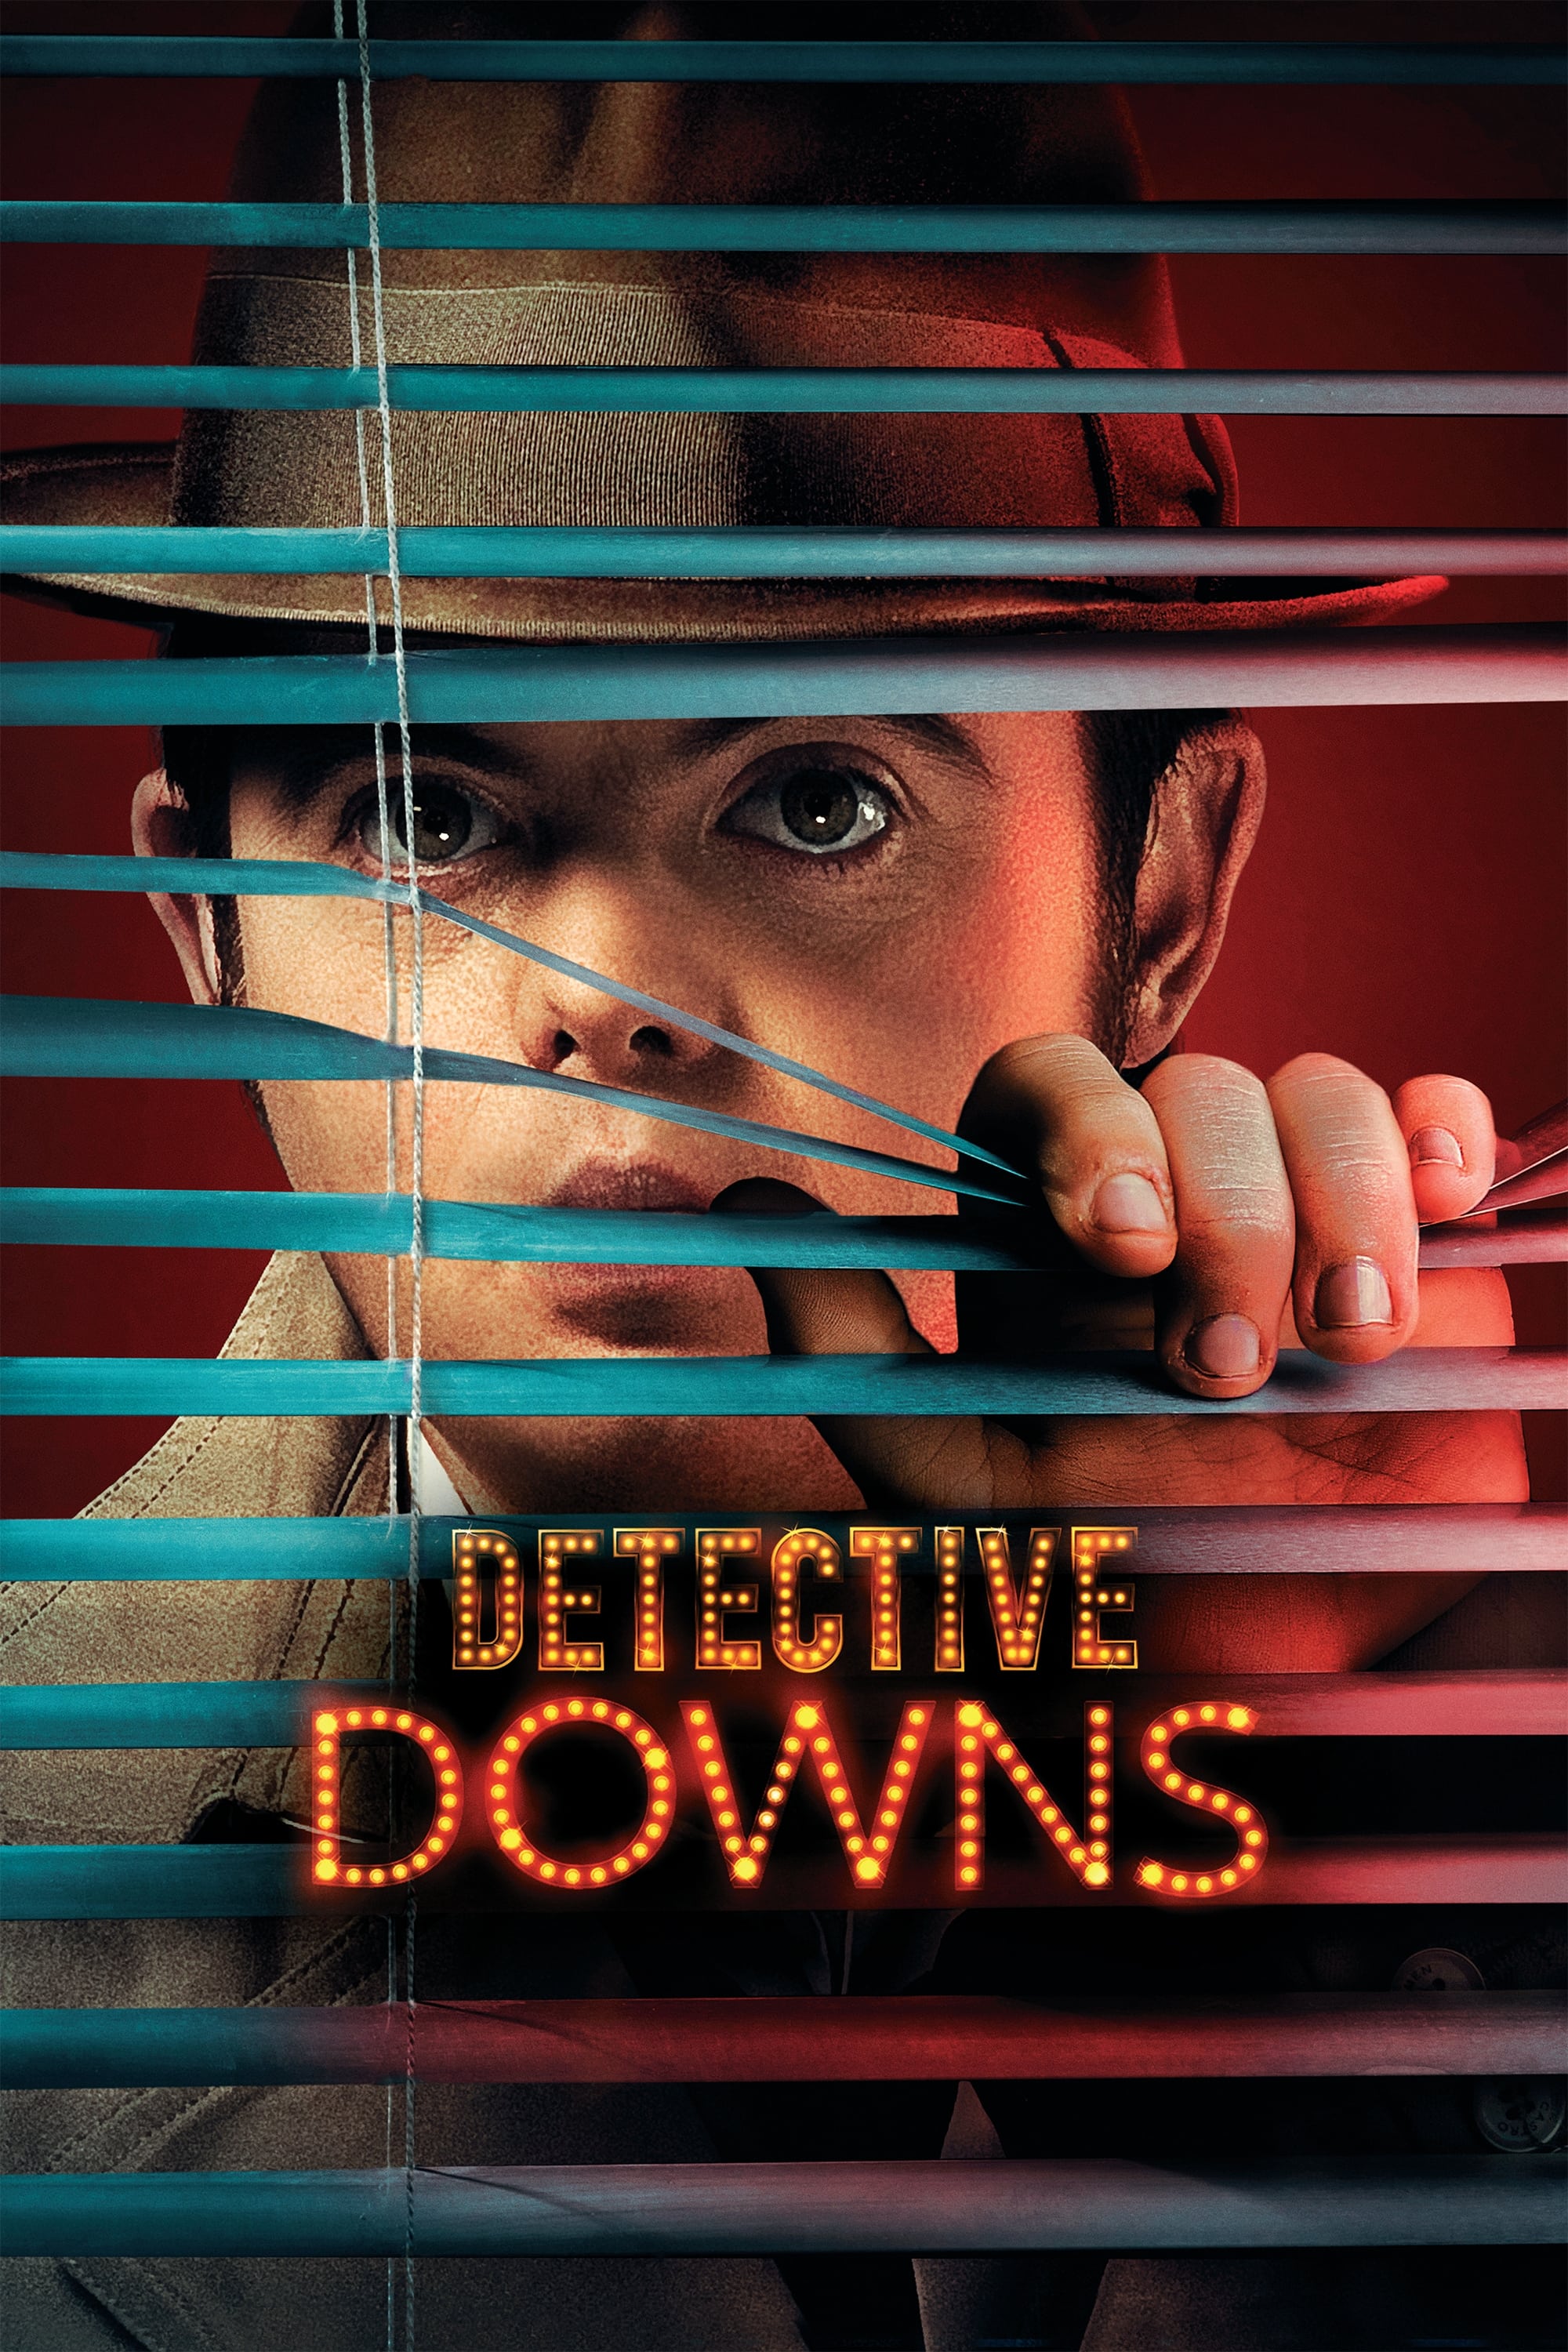 Detective Downs